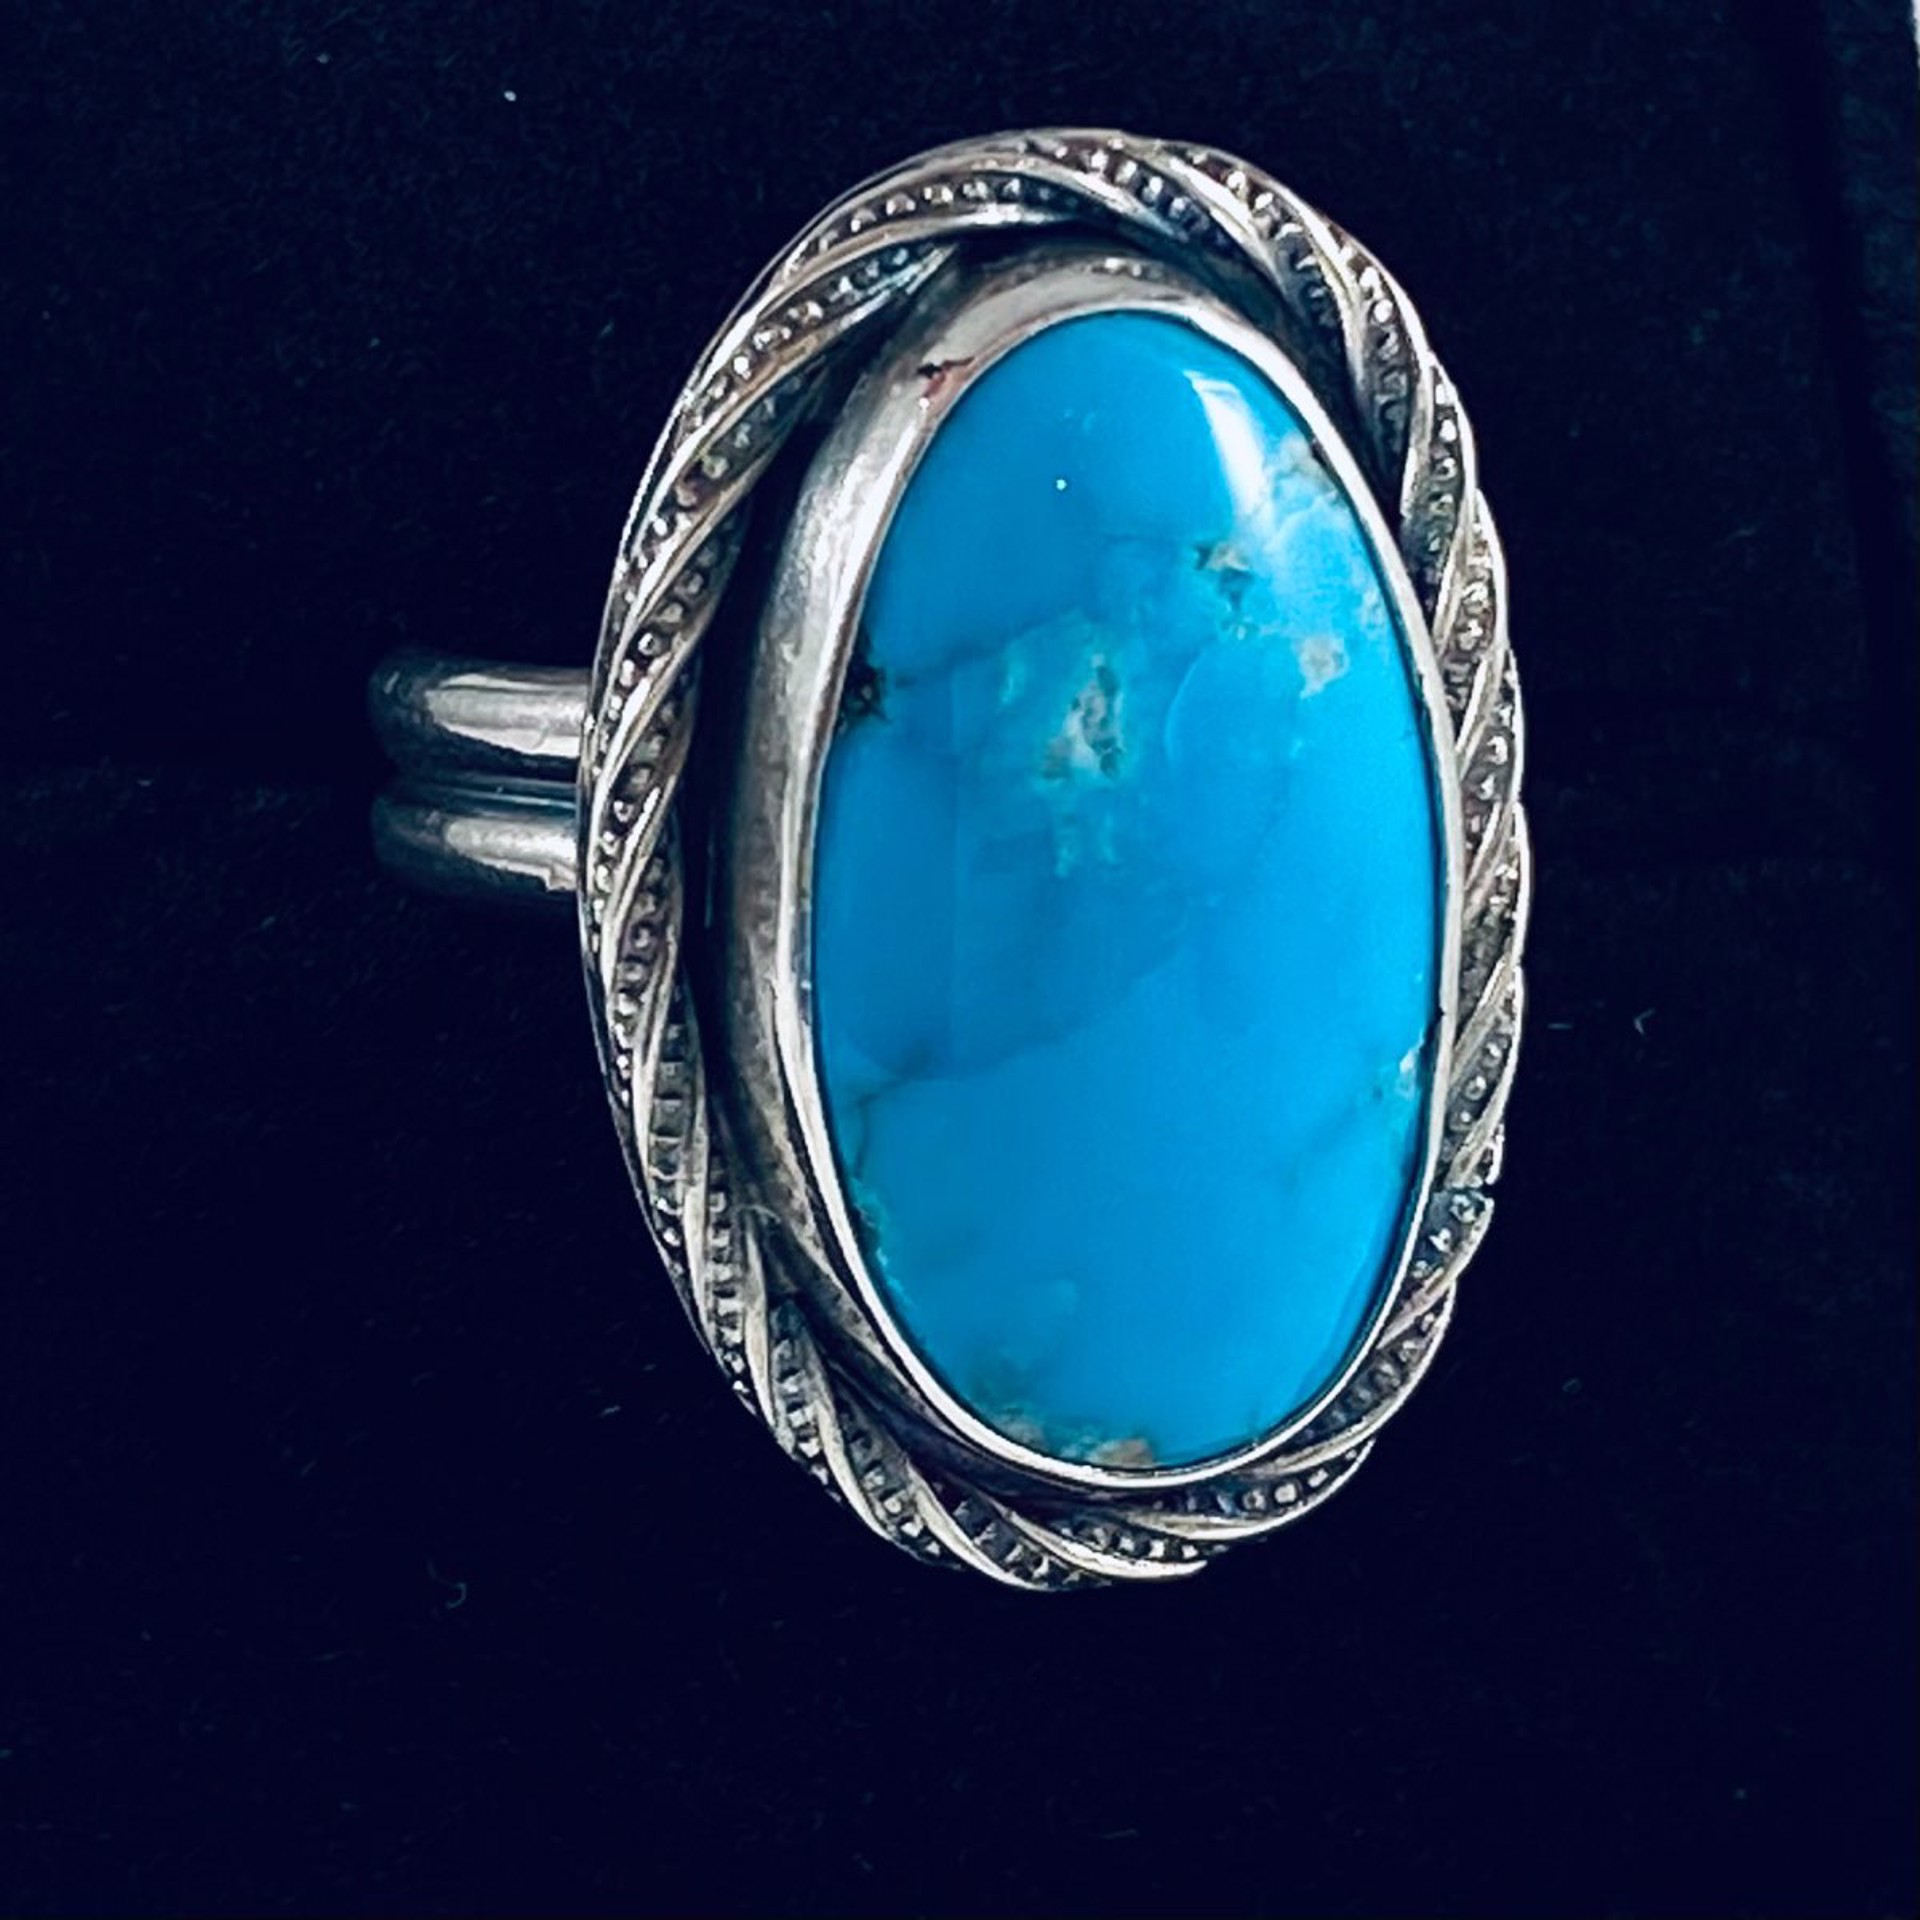 AB22-35 Large Oval Morenci Turquoise Ring sz8 by Anne Bivens